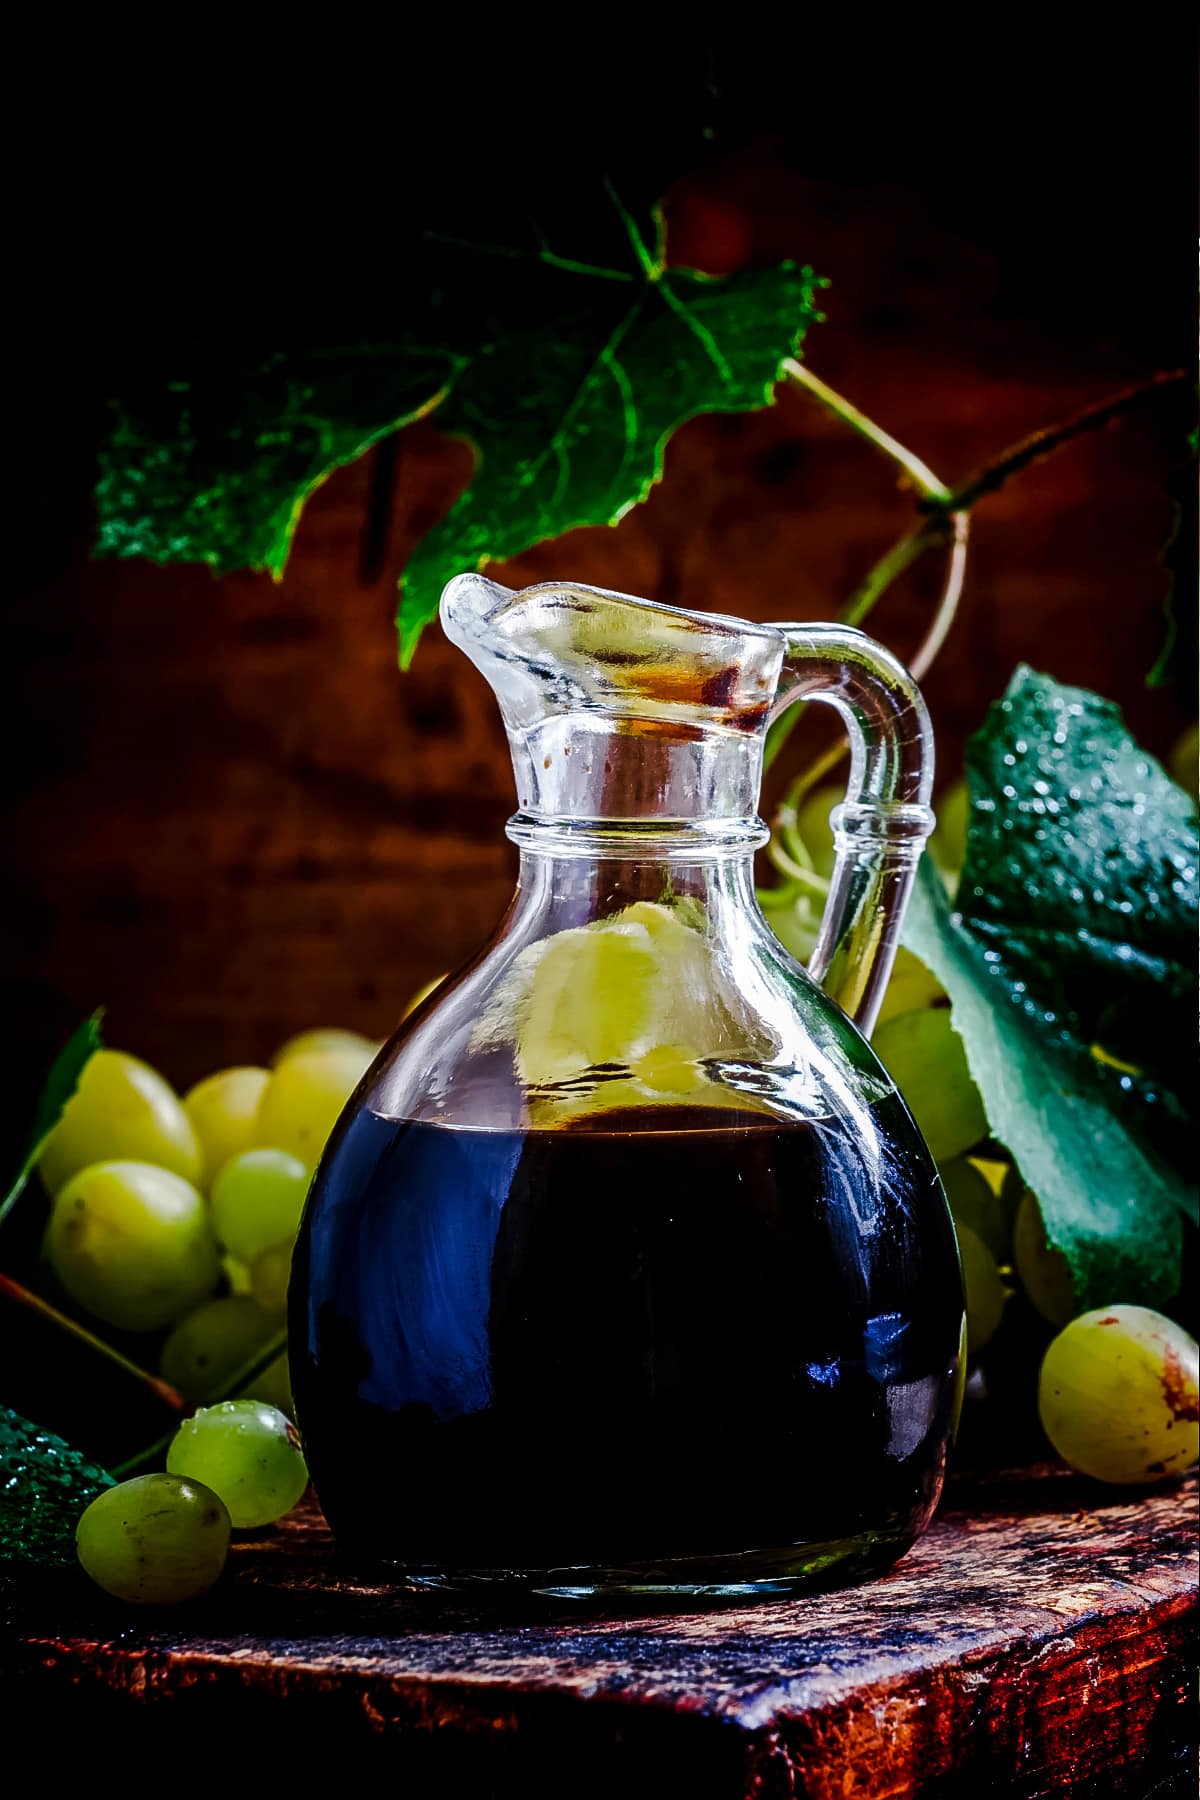 Dark balsamic vinegar in a small glass pitcher with grapes on the table next to it.